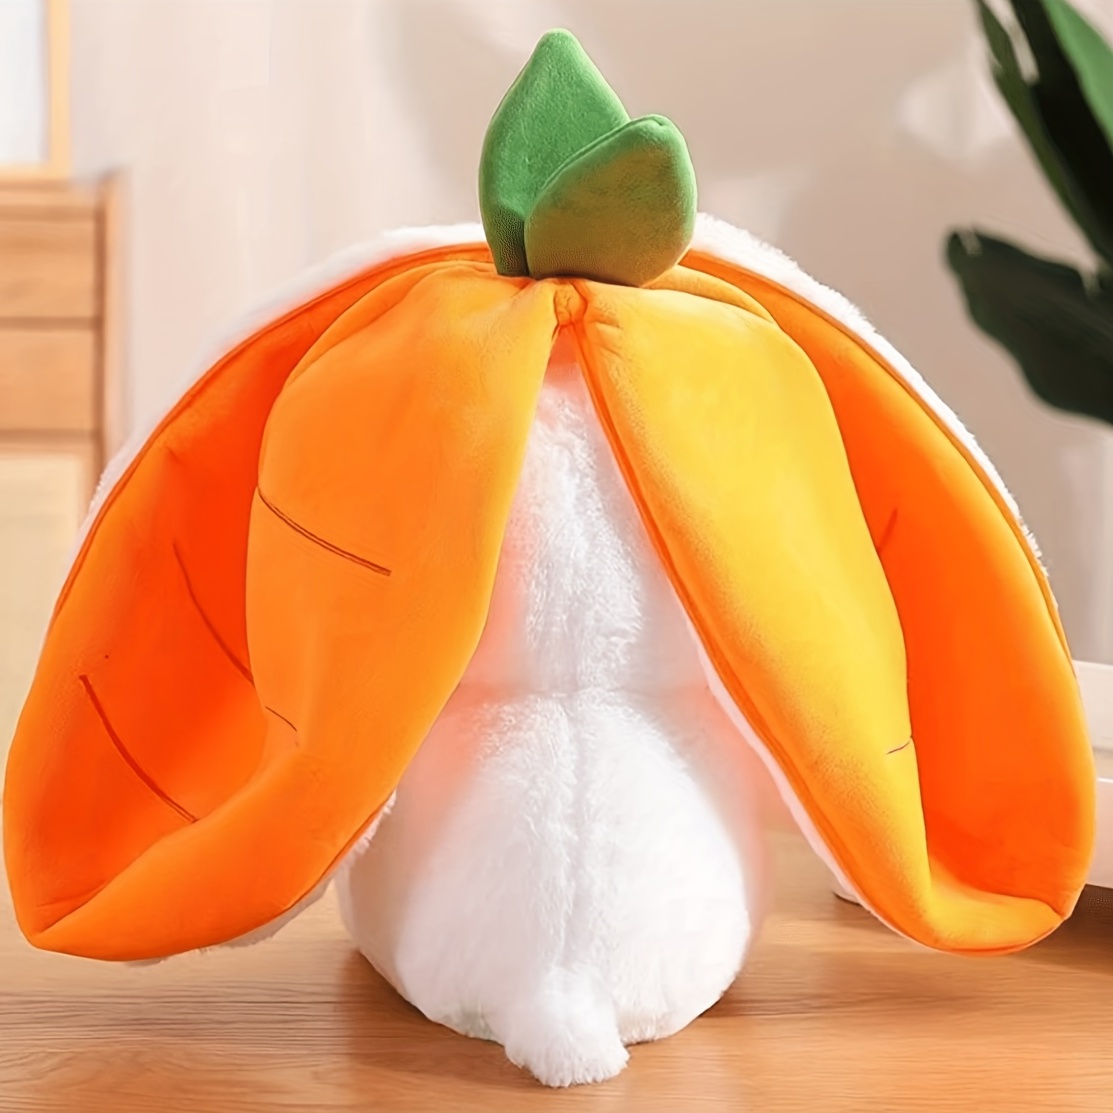 Stuffed Cute, Stuffed Animals Plush Toy Cute Dolls, Plushies Hide And Seek  Toy, Doll Plush Toy Pillows Cute Stuffed Animals The Best Gift For Childr